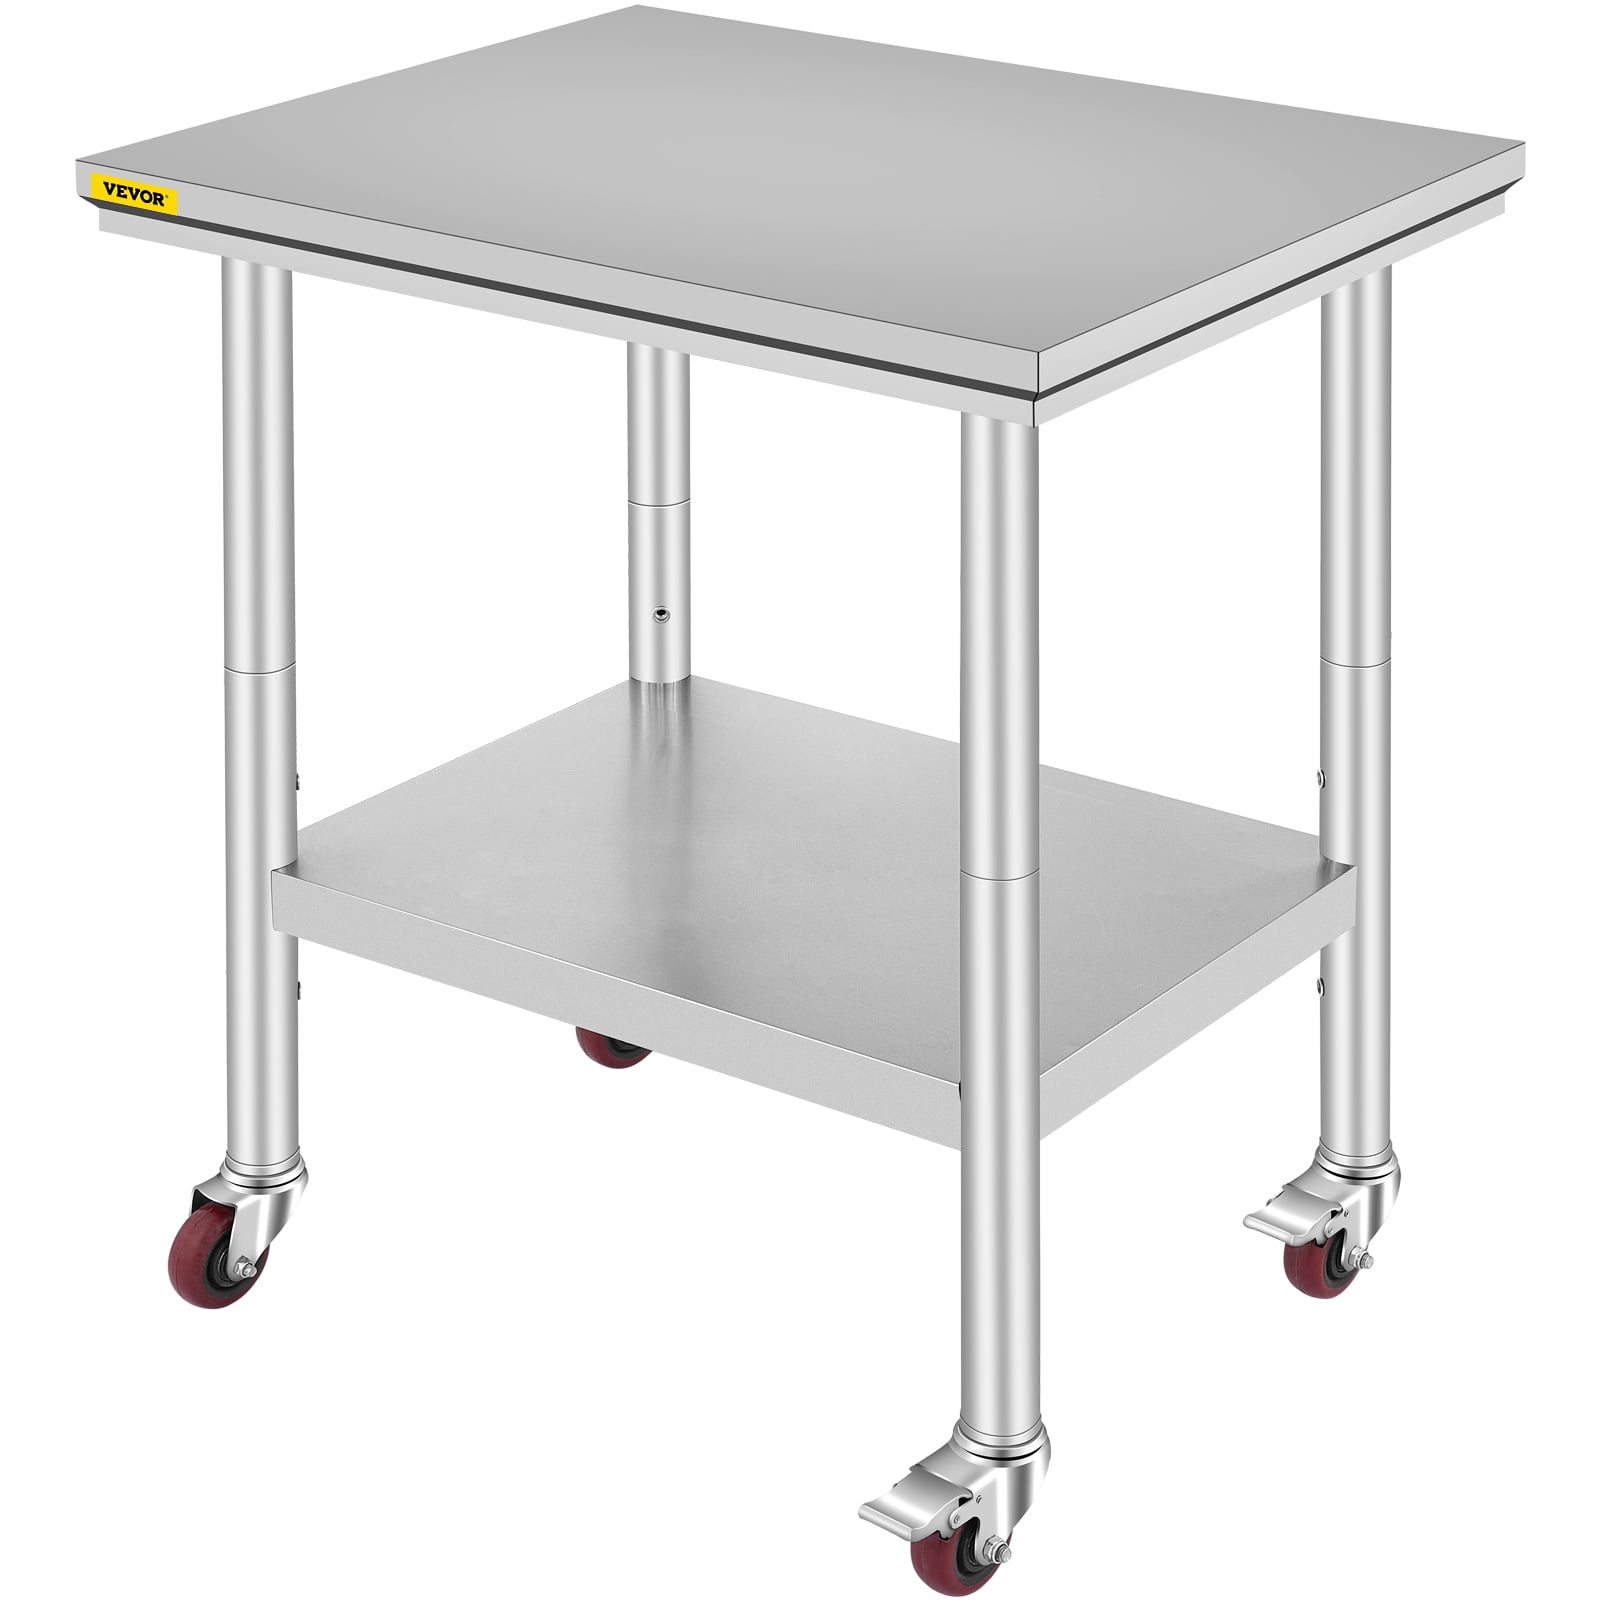 Commercial Catering Table Kitchen Equip Commercial Prep Table Bench S/ Steel 